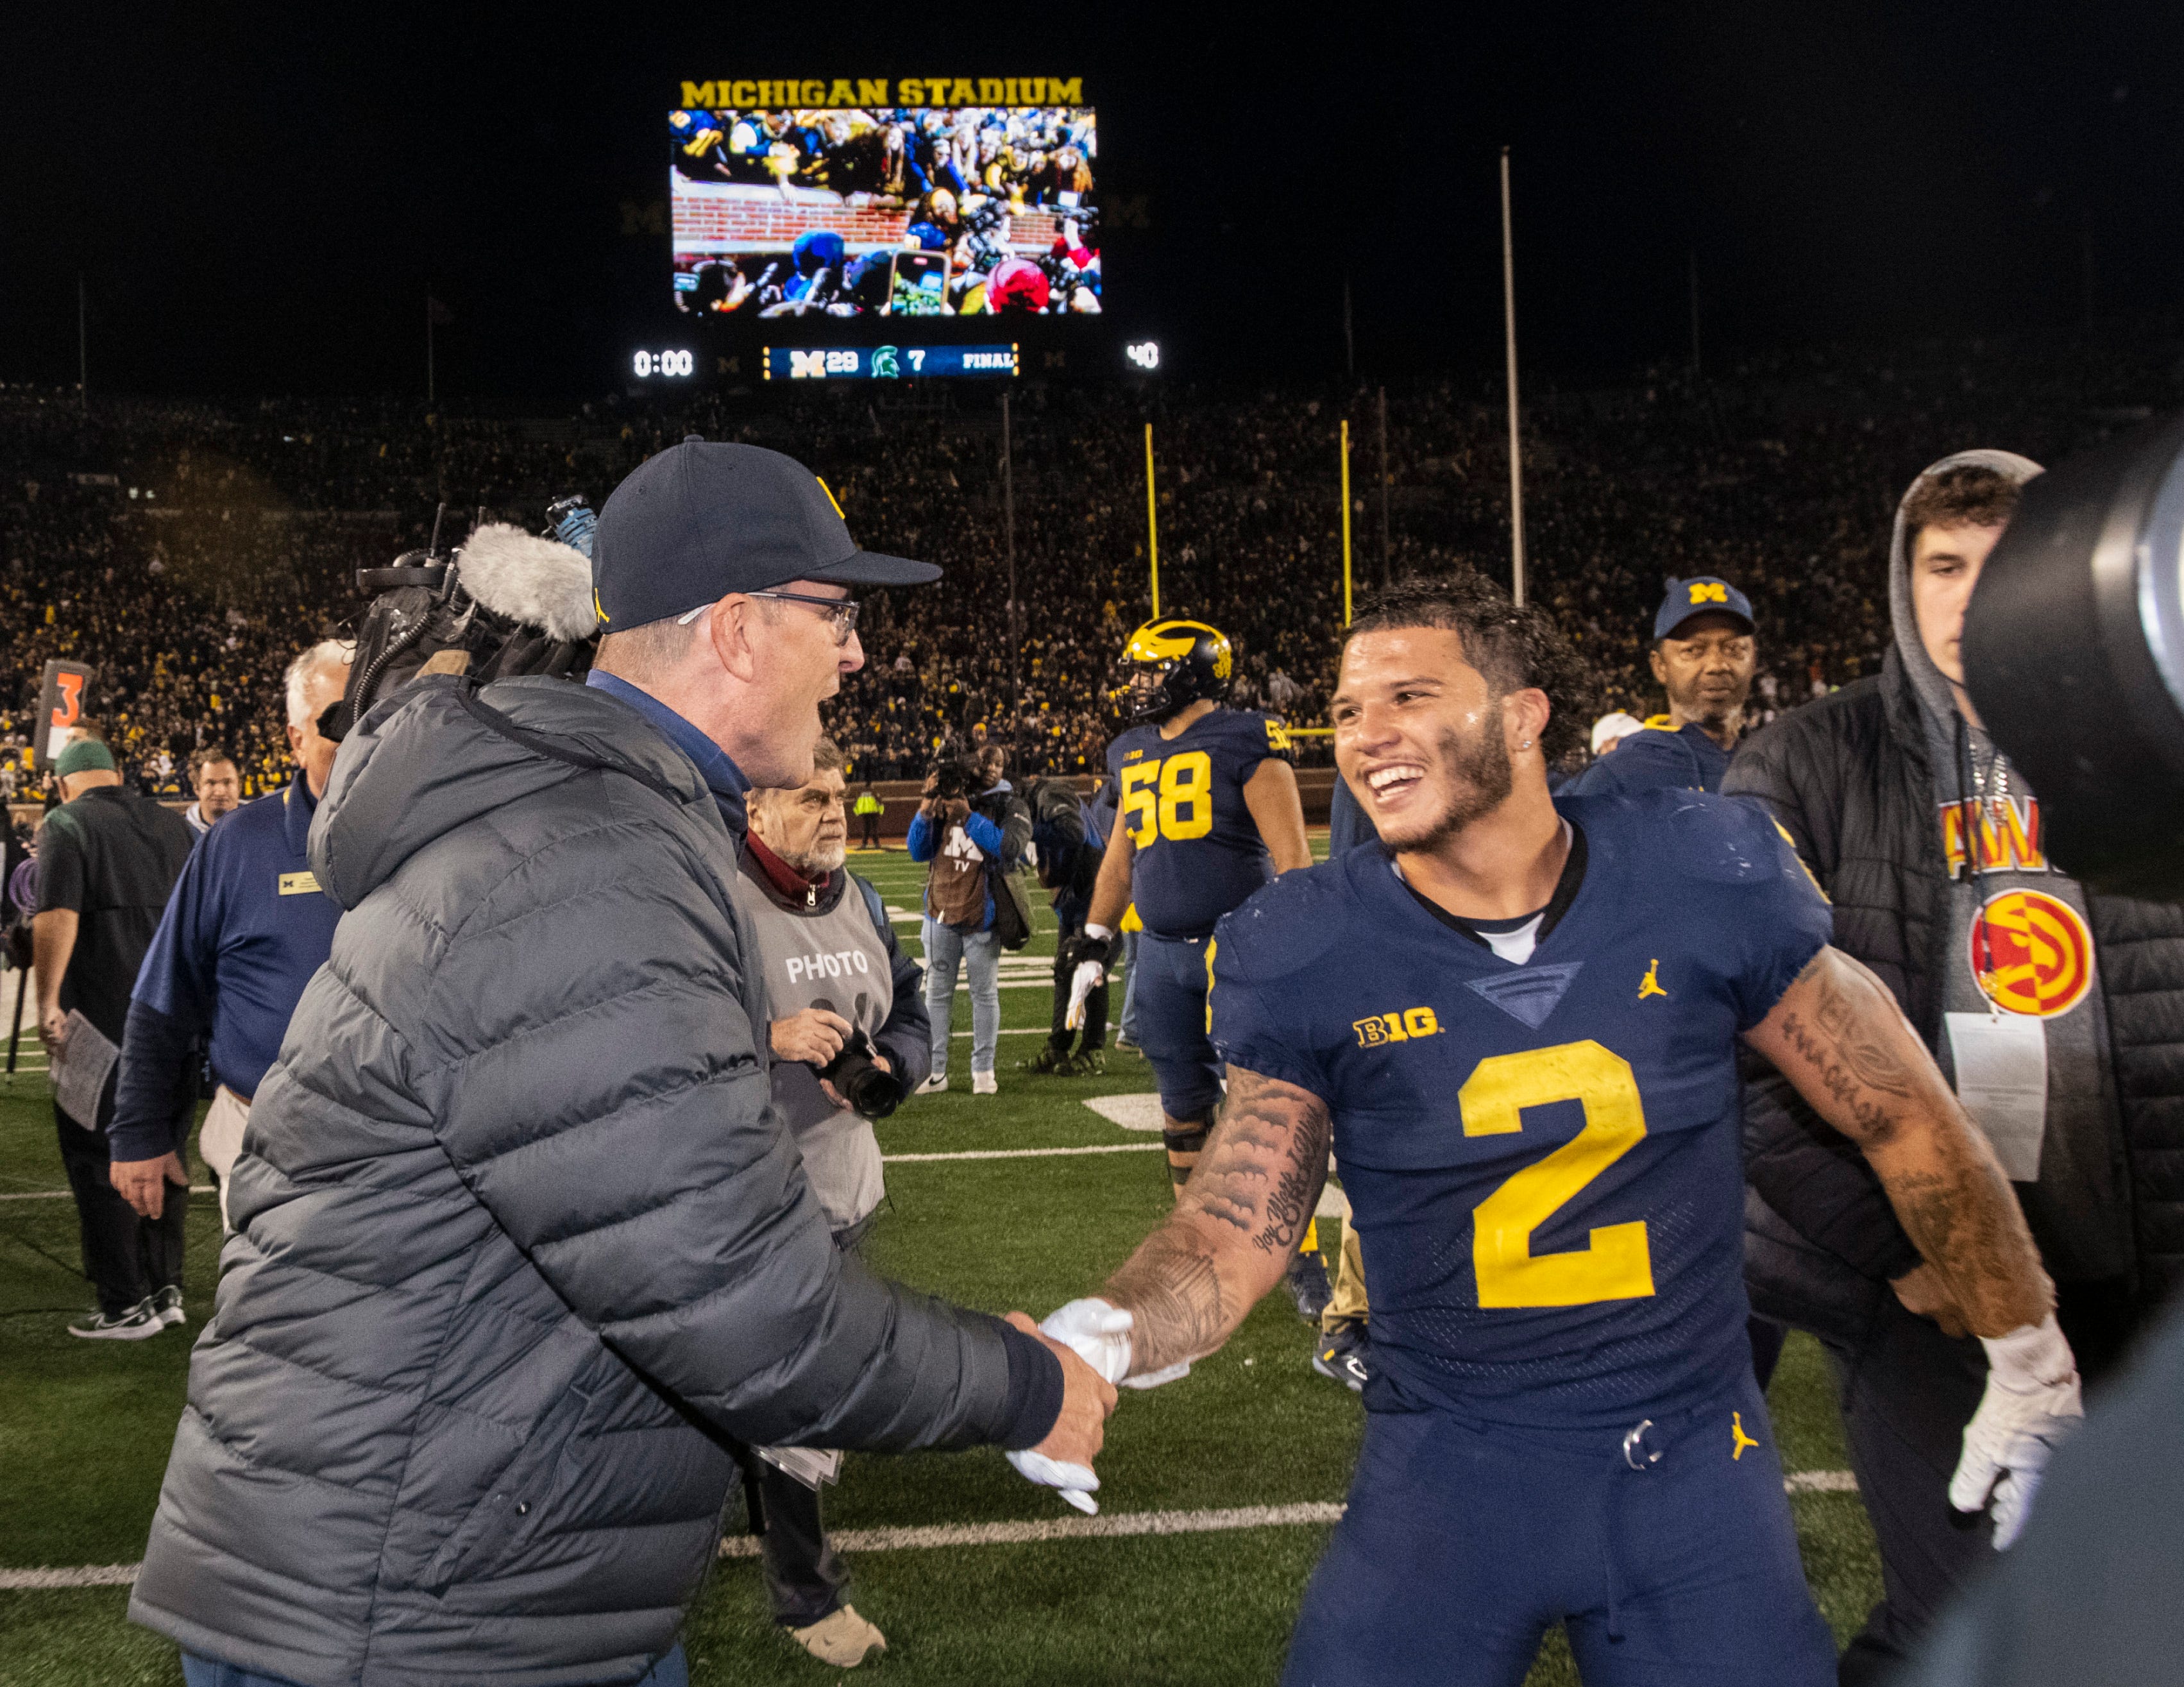 Michigan running back Blake Corum is all smiles as he greets head coach Jim Harbaugh on the field immediately after Michigan’s 29-7 victory over Michigan State in Ann Arbor.  Corum rushed for 177 yards and two touchdowns. The fourth-ranked and still-undefeated Michigan Wolverines (8-0) avenged last year’s loss to the Spartans in East Lansing with a dominant defensive performance.